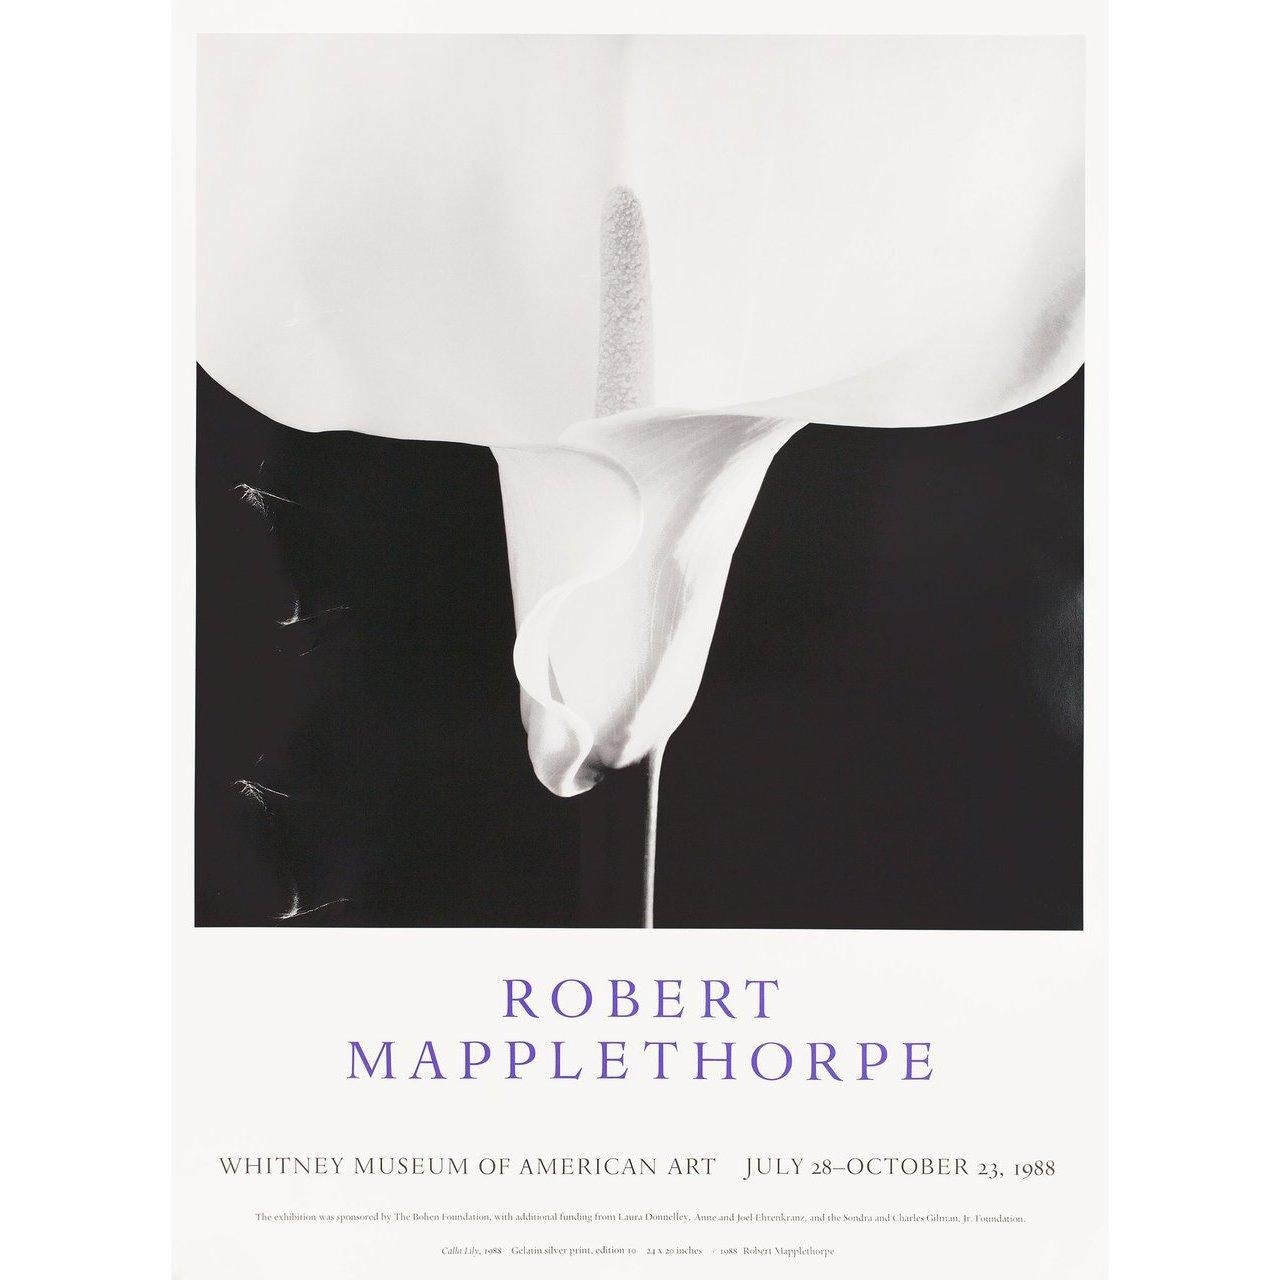 Original 1988 U.S. poster by Robert Mapplethorpe for the exhibition ‘Robert Mapplethorpe’. Fine condition, rolled. Please note: the size is stated in inches and the actual size can vary by an inch or more.
 